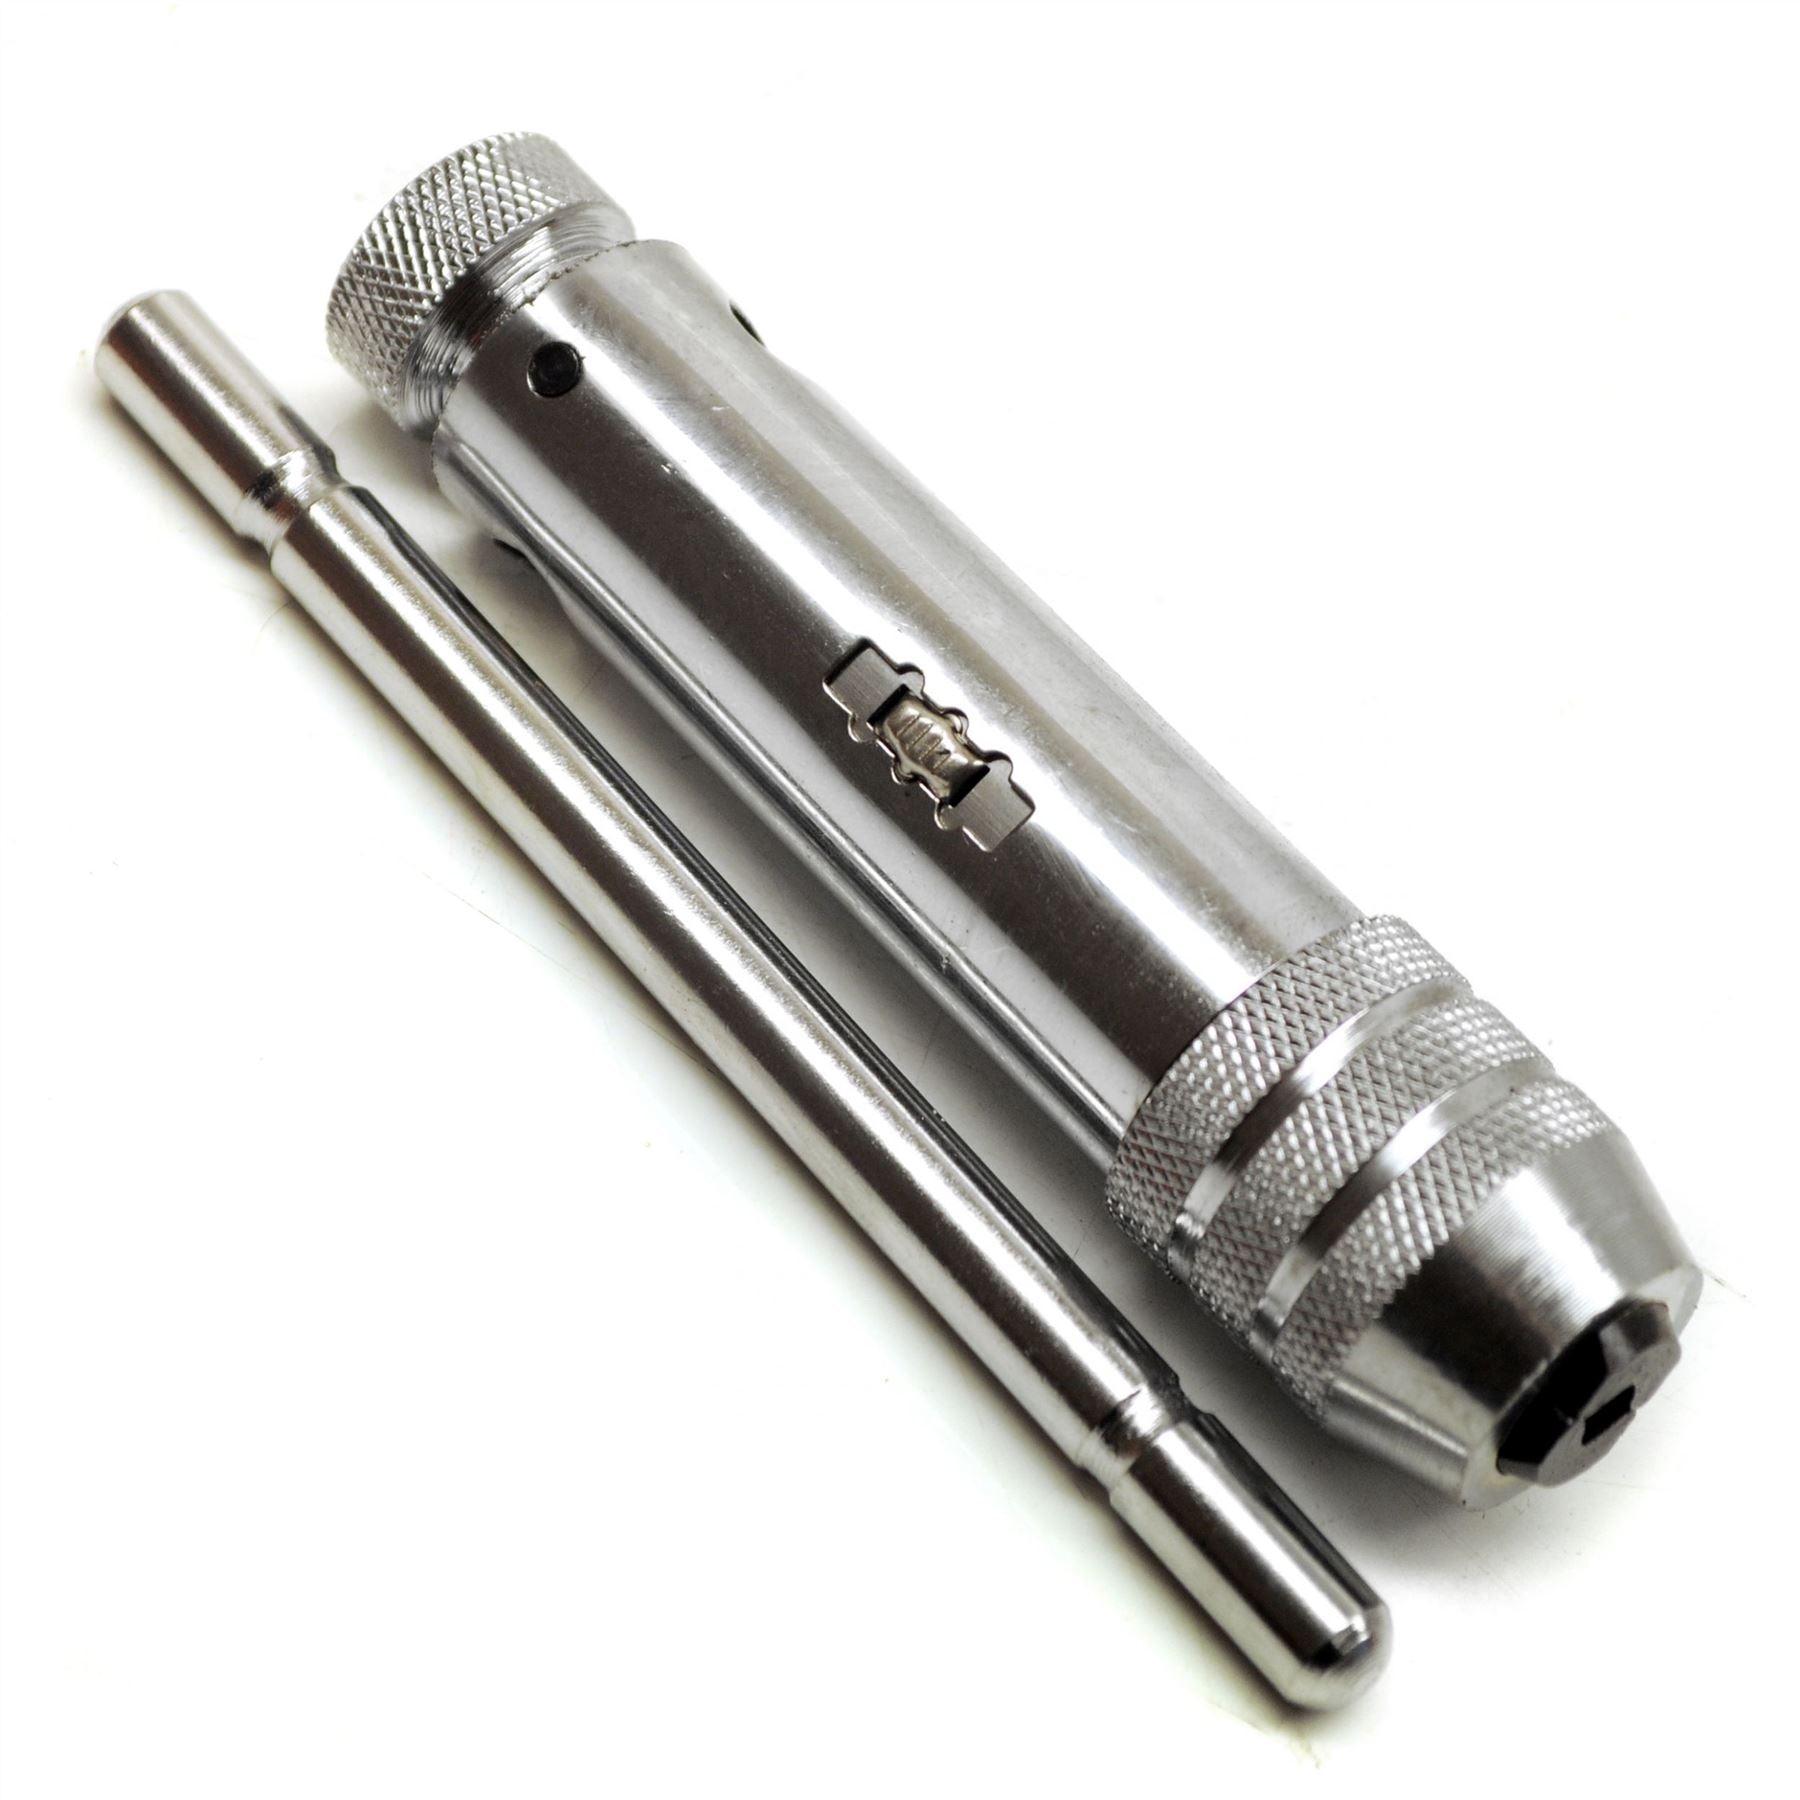 M5-M12 Ratchet Tap Wrench TE164